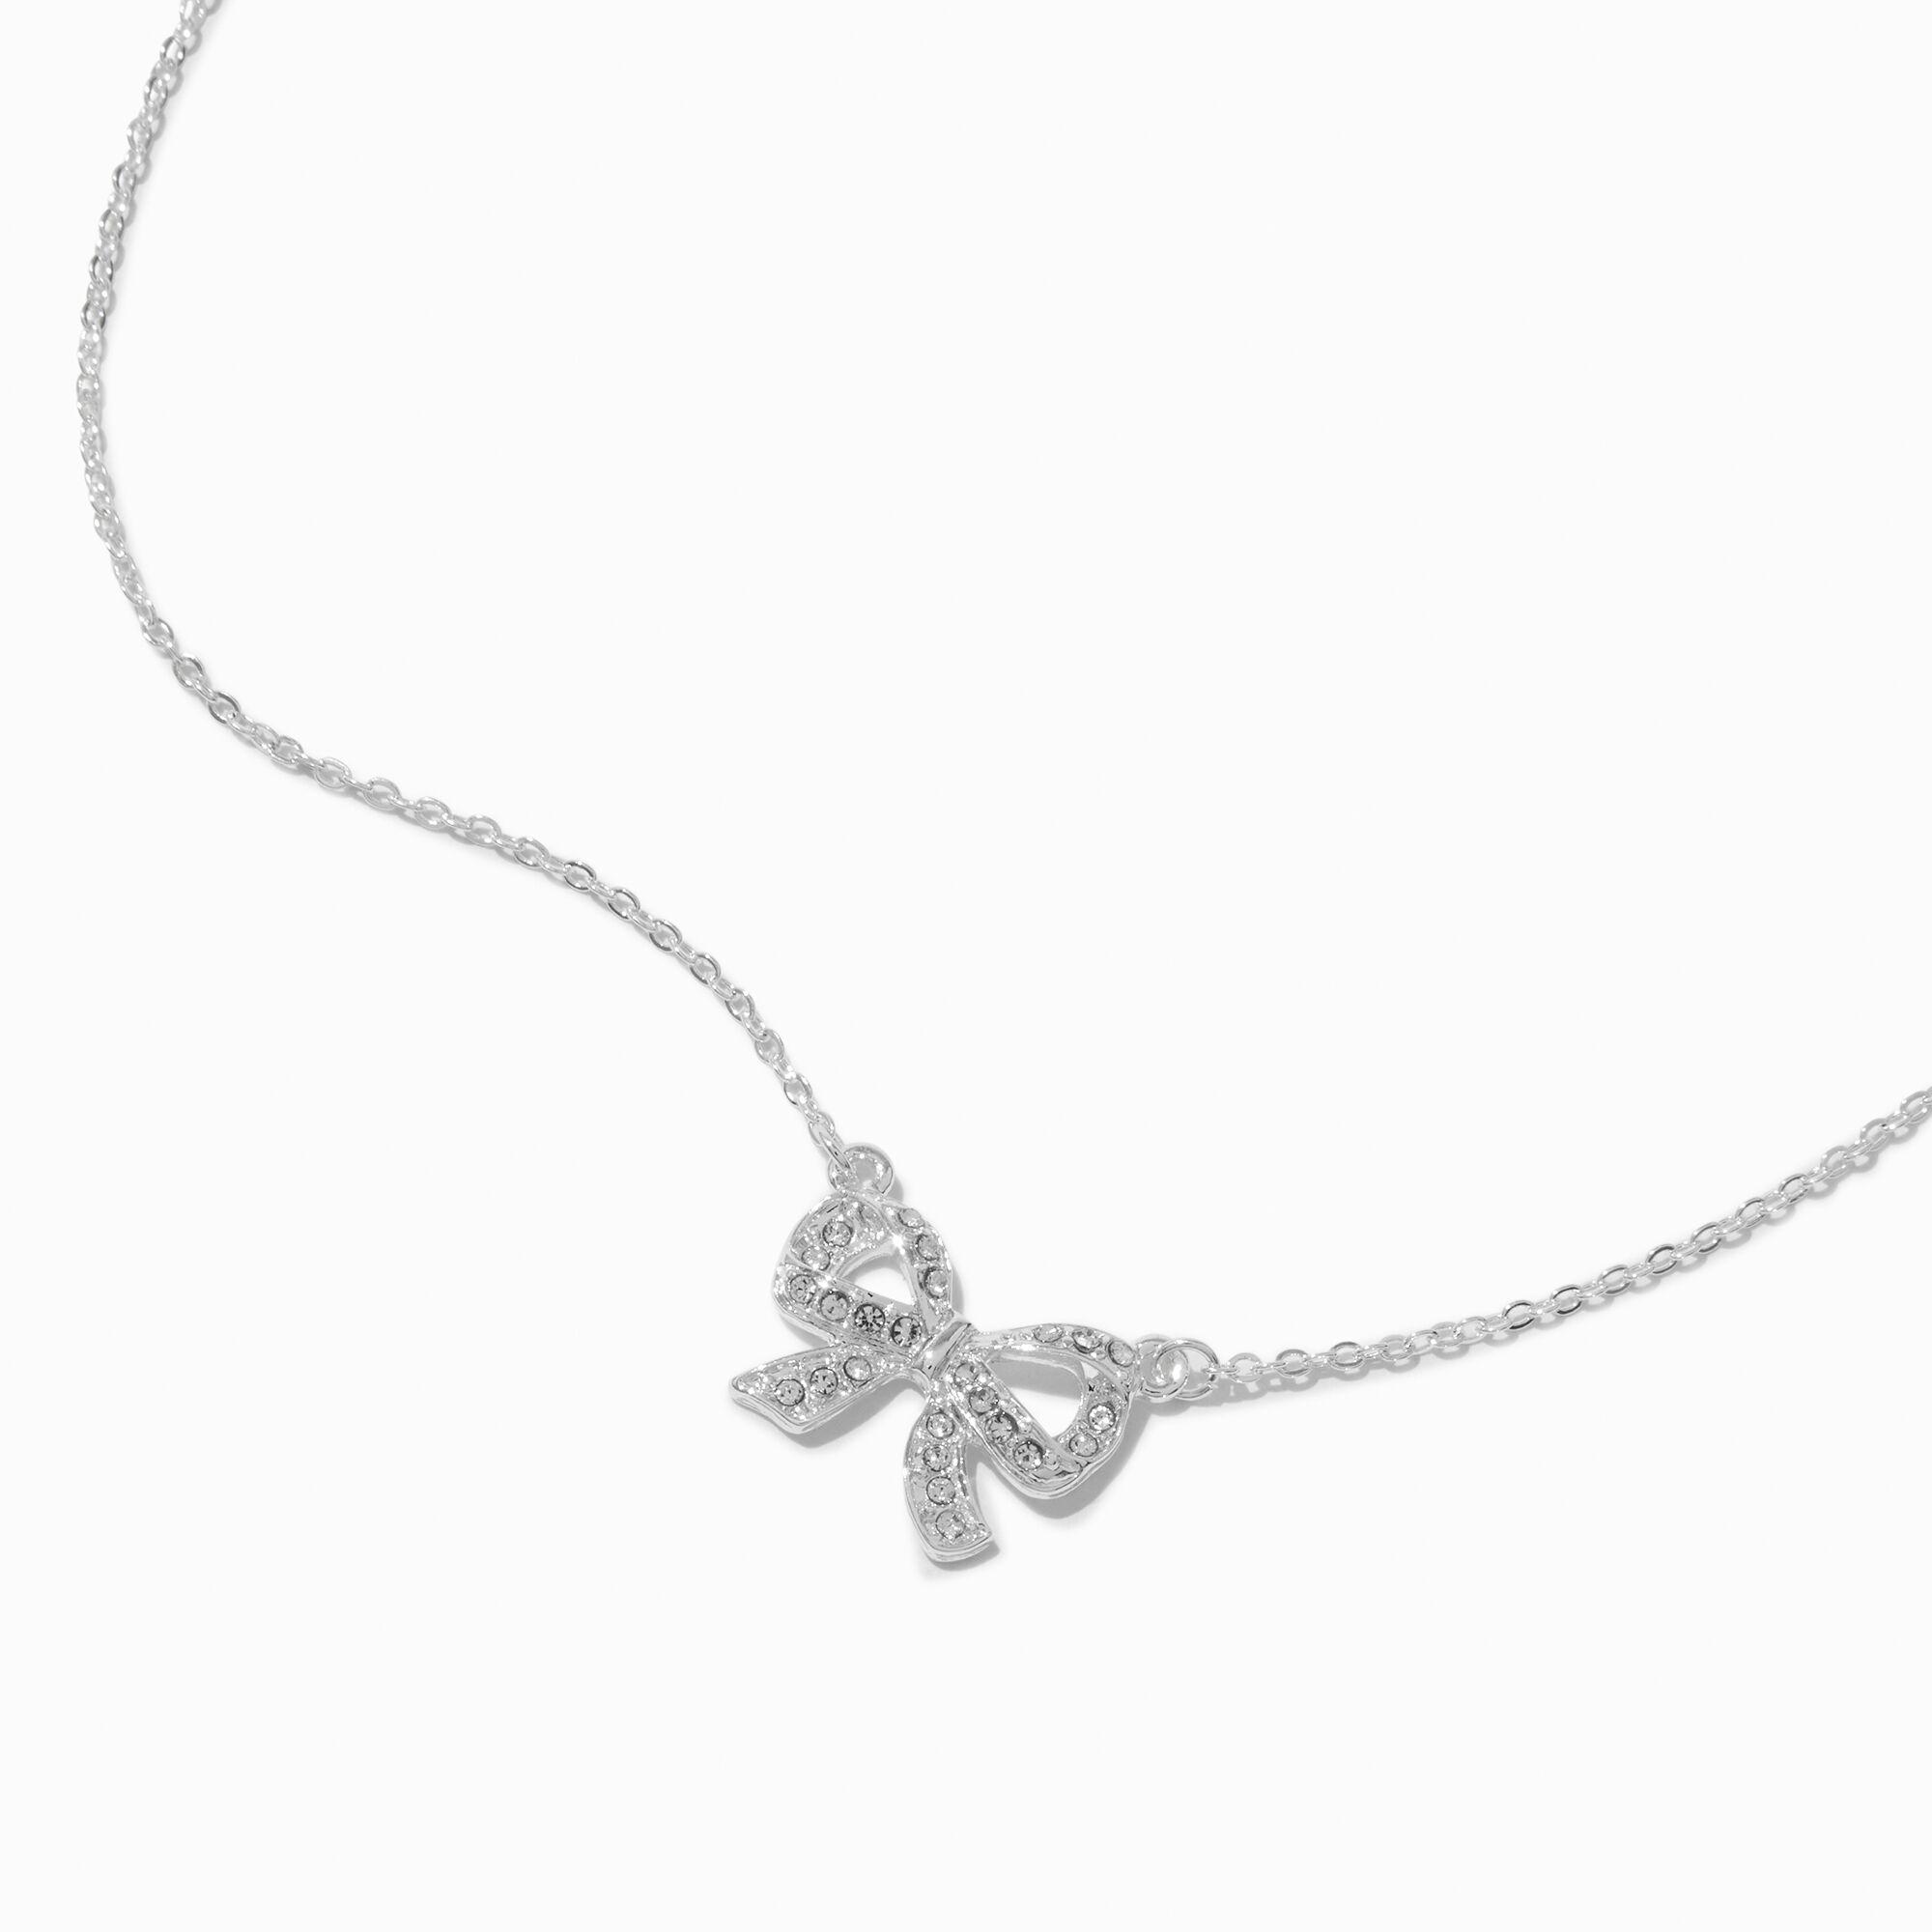 View Claires Tone Crystal Bow Pendant Necklace Silver information